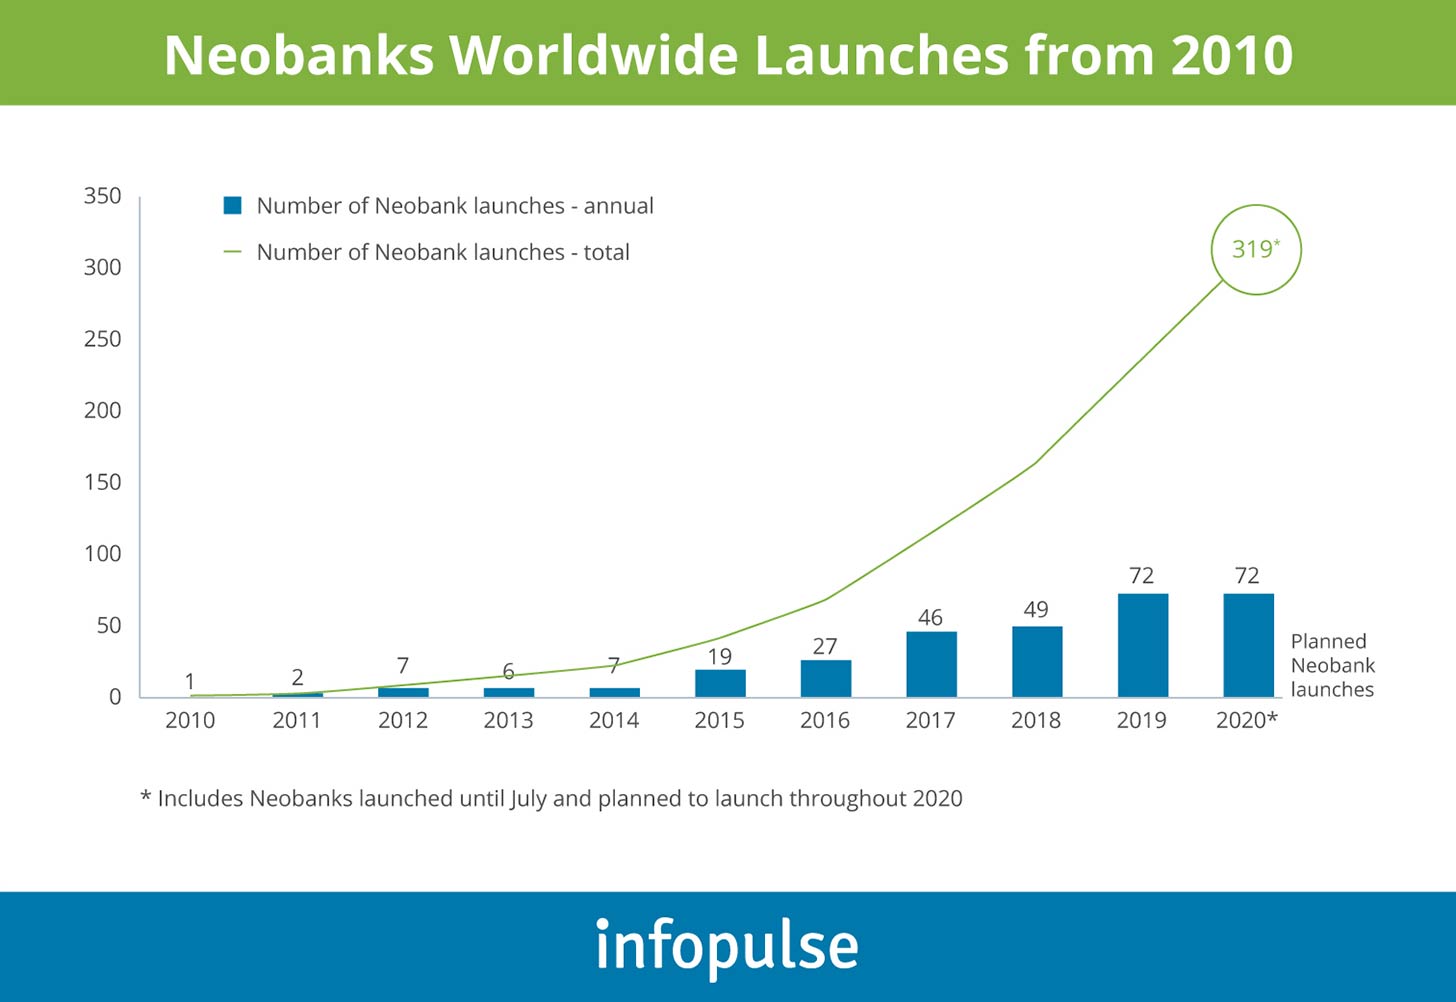 Neobanks Worldwide Launches from 2010 - Infopulse - 1